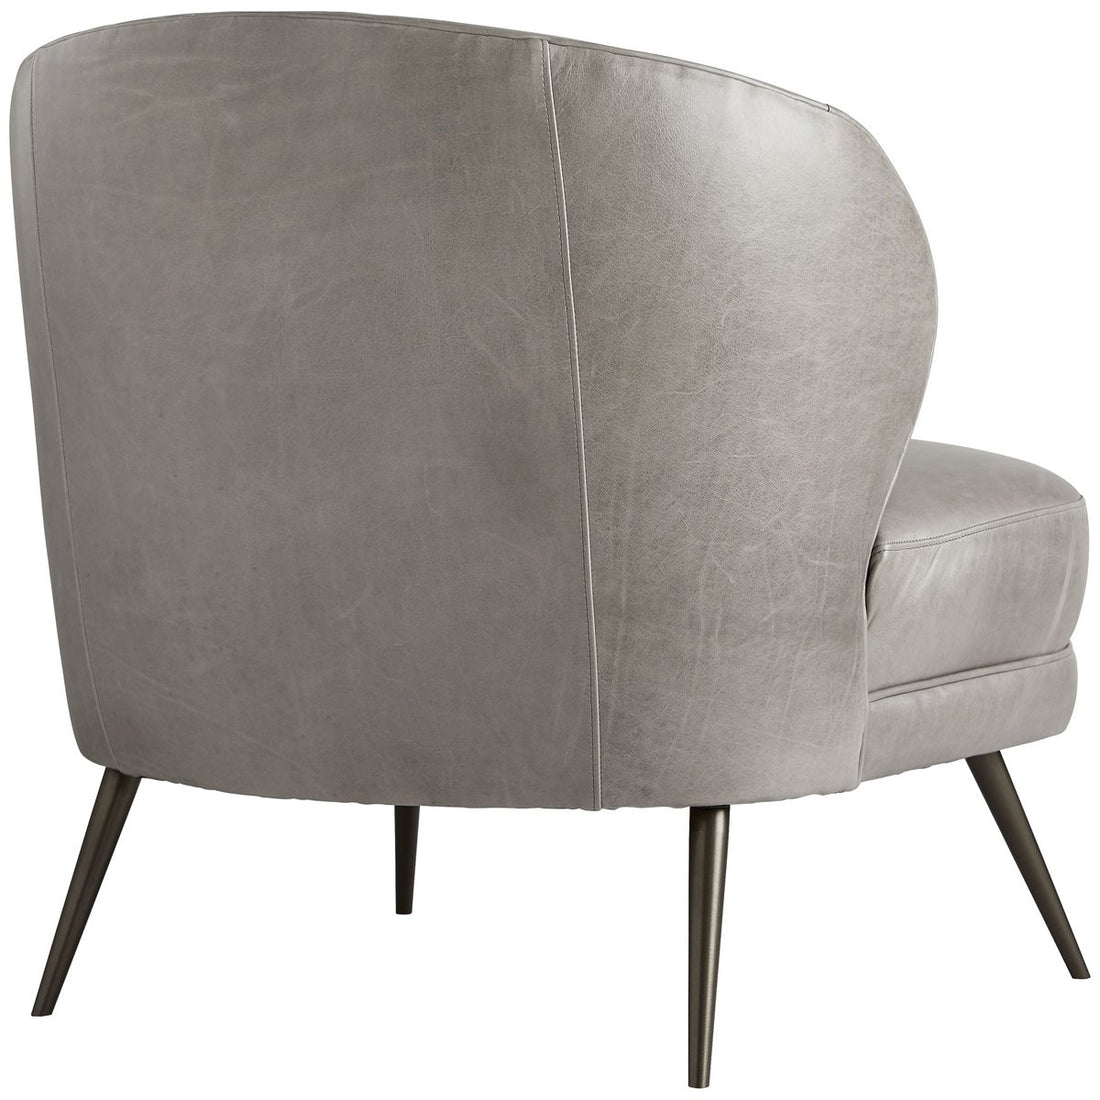 Arteriors Kitts Chair in Mineral Grey Leather